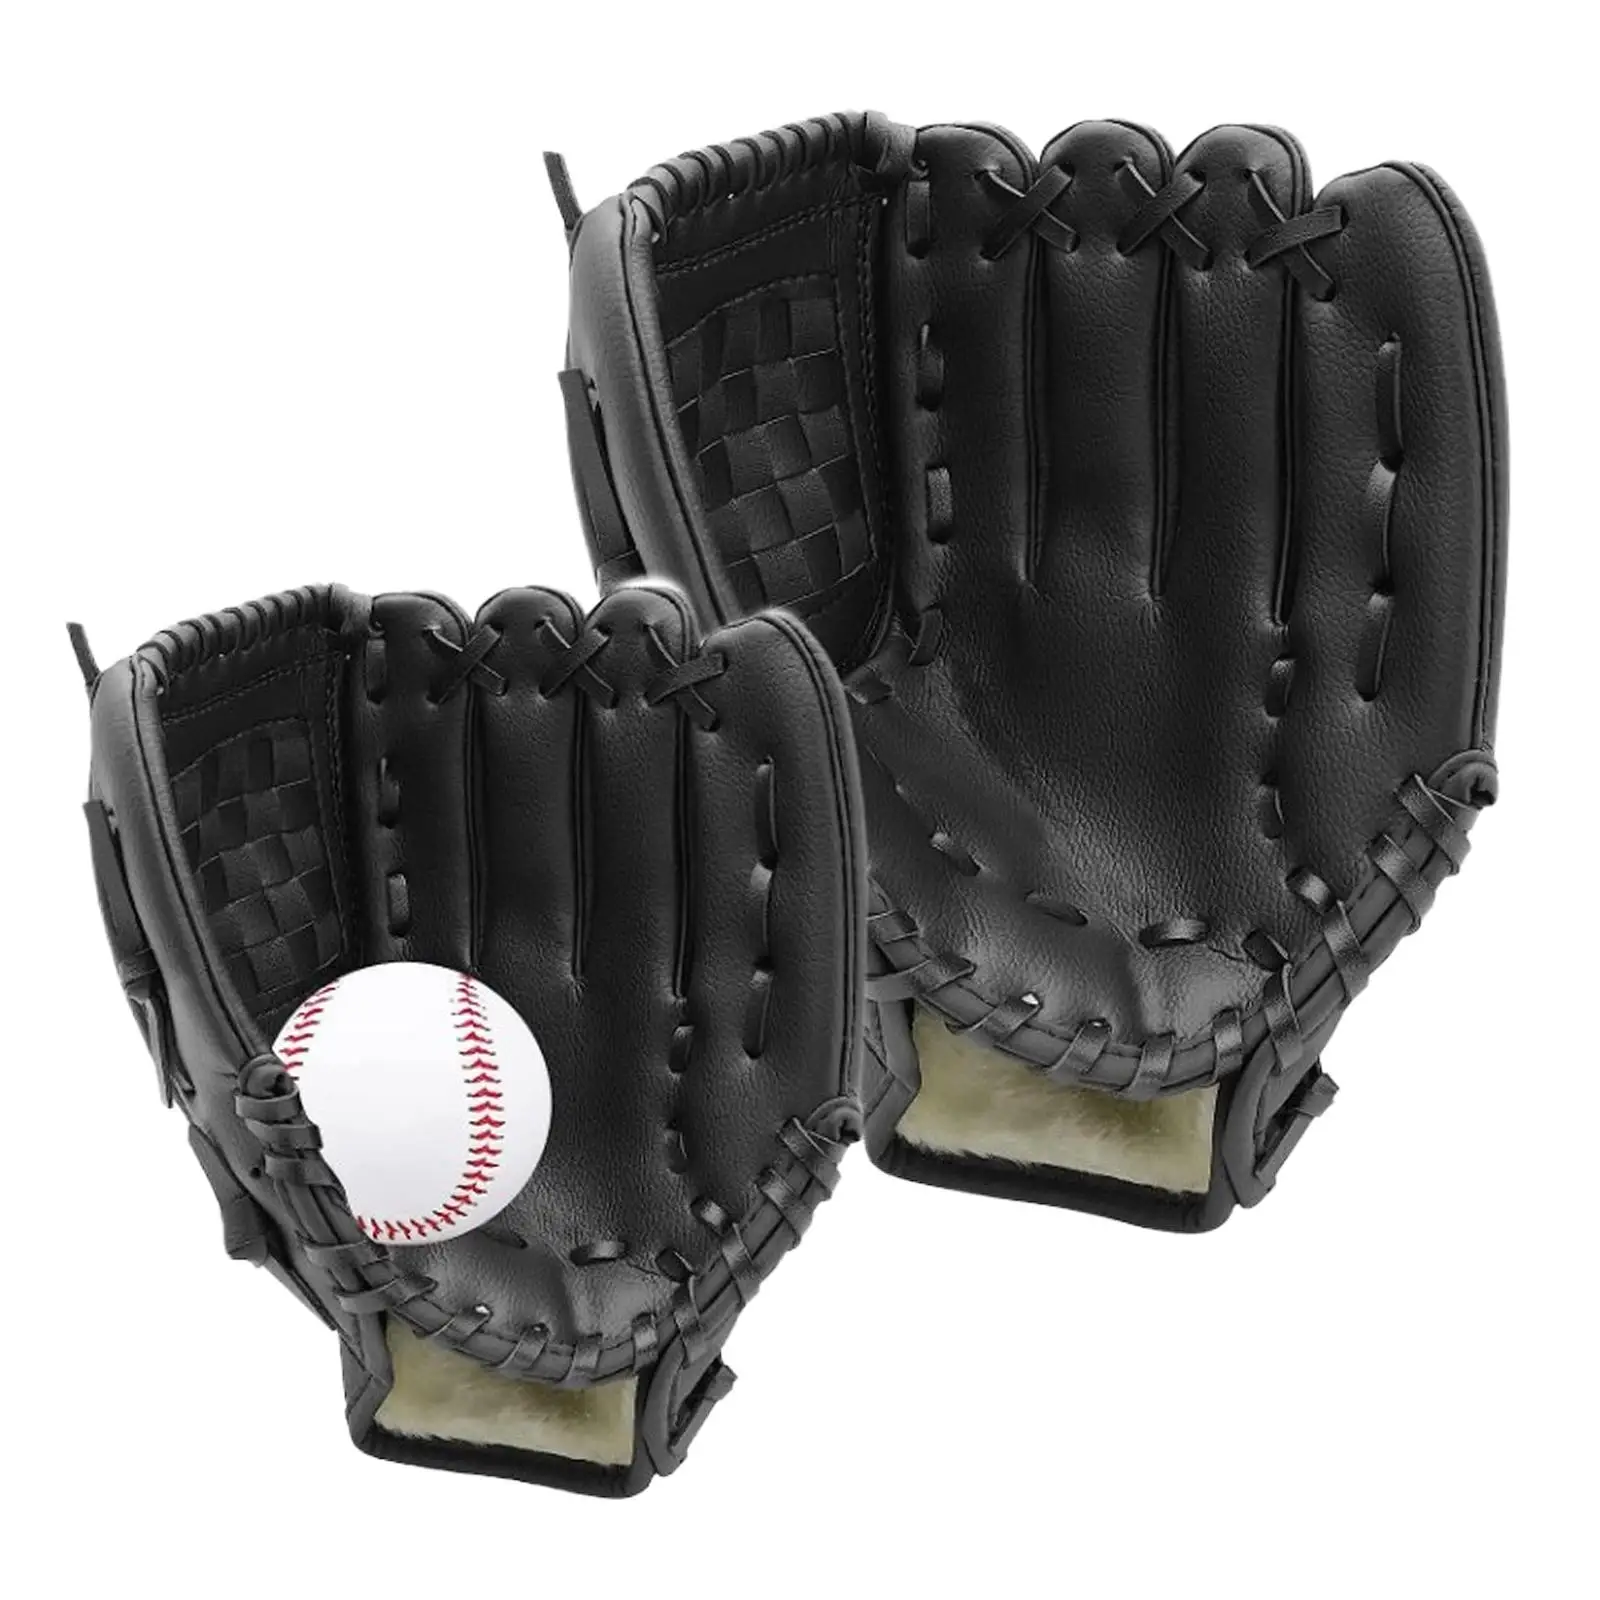 Baseball Gloves Mitts Sports Professional Thickened Beginner Youth Backyard Adult Kids and Ball Team Game Infield Pitcher Gloves